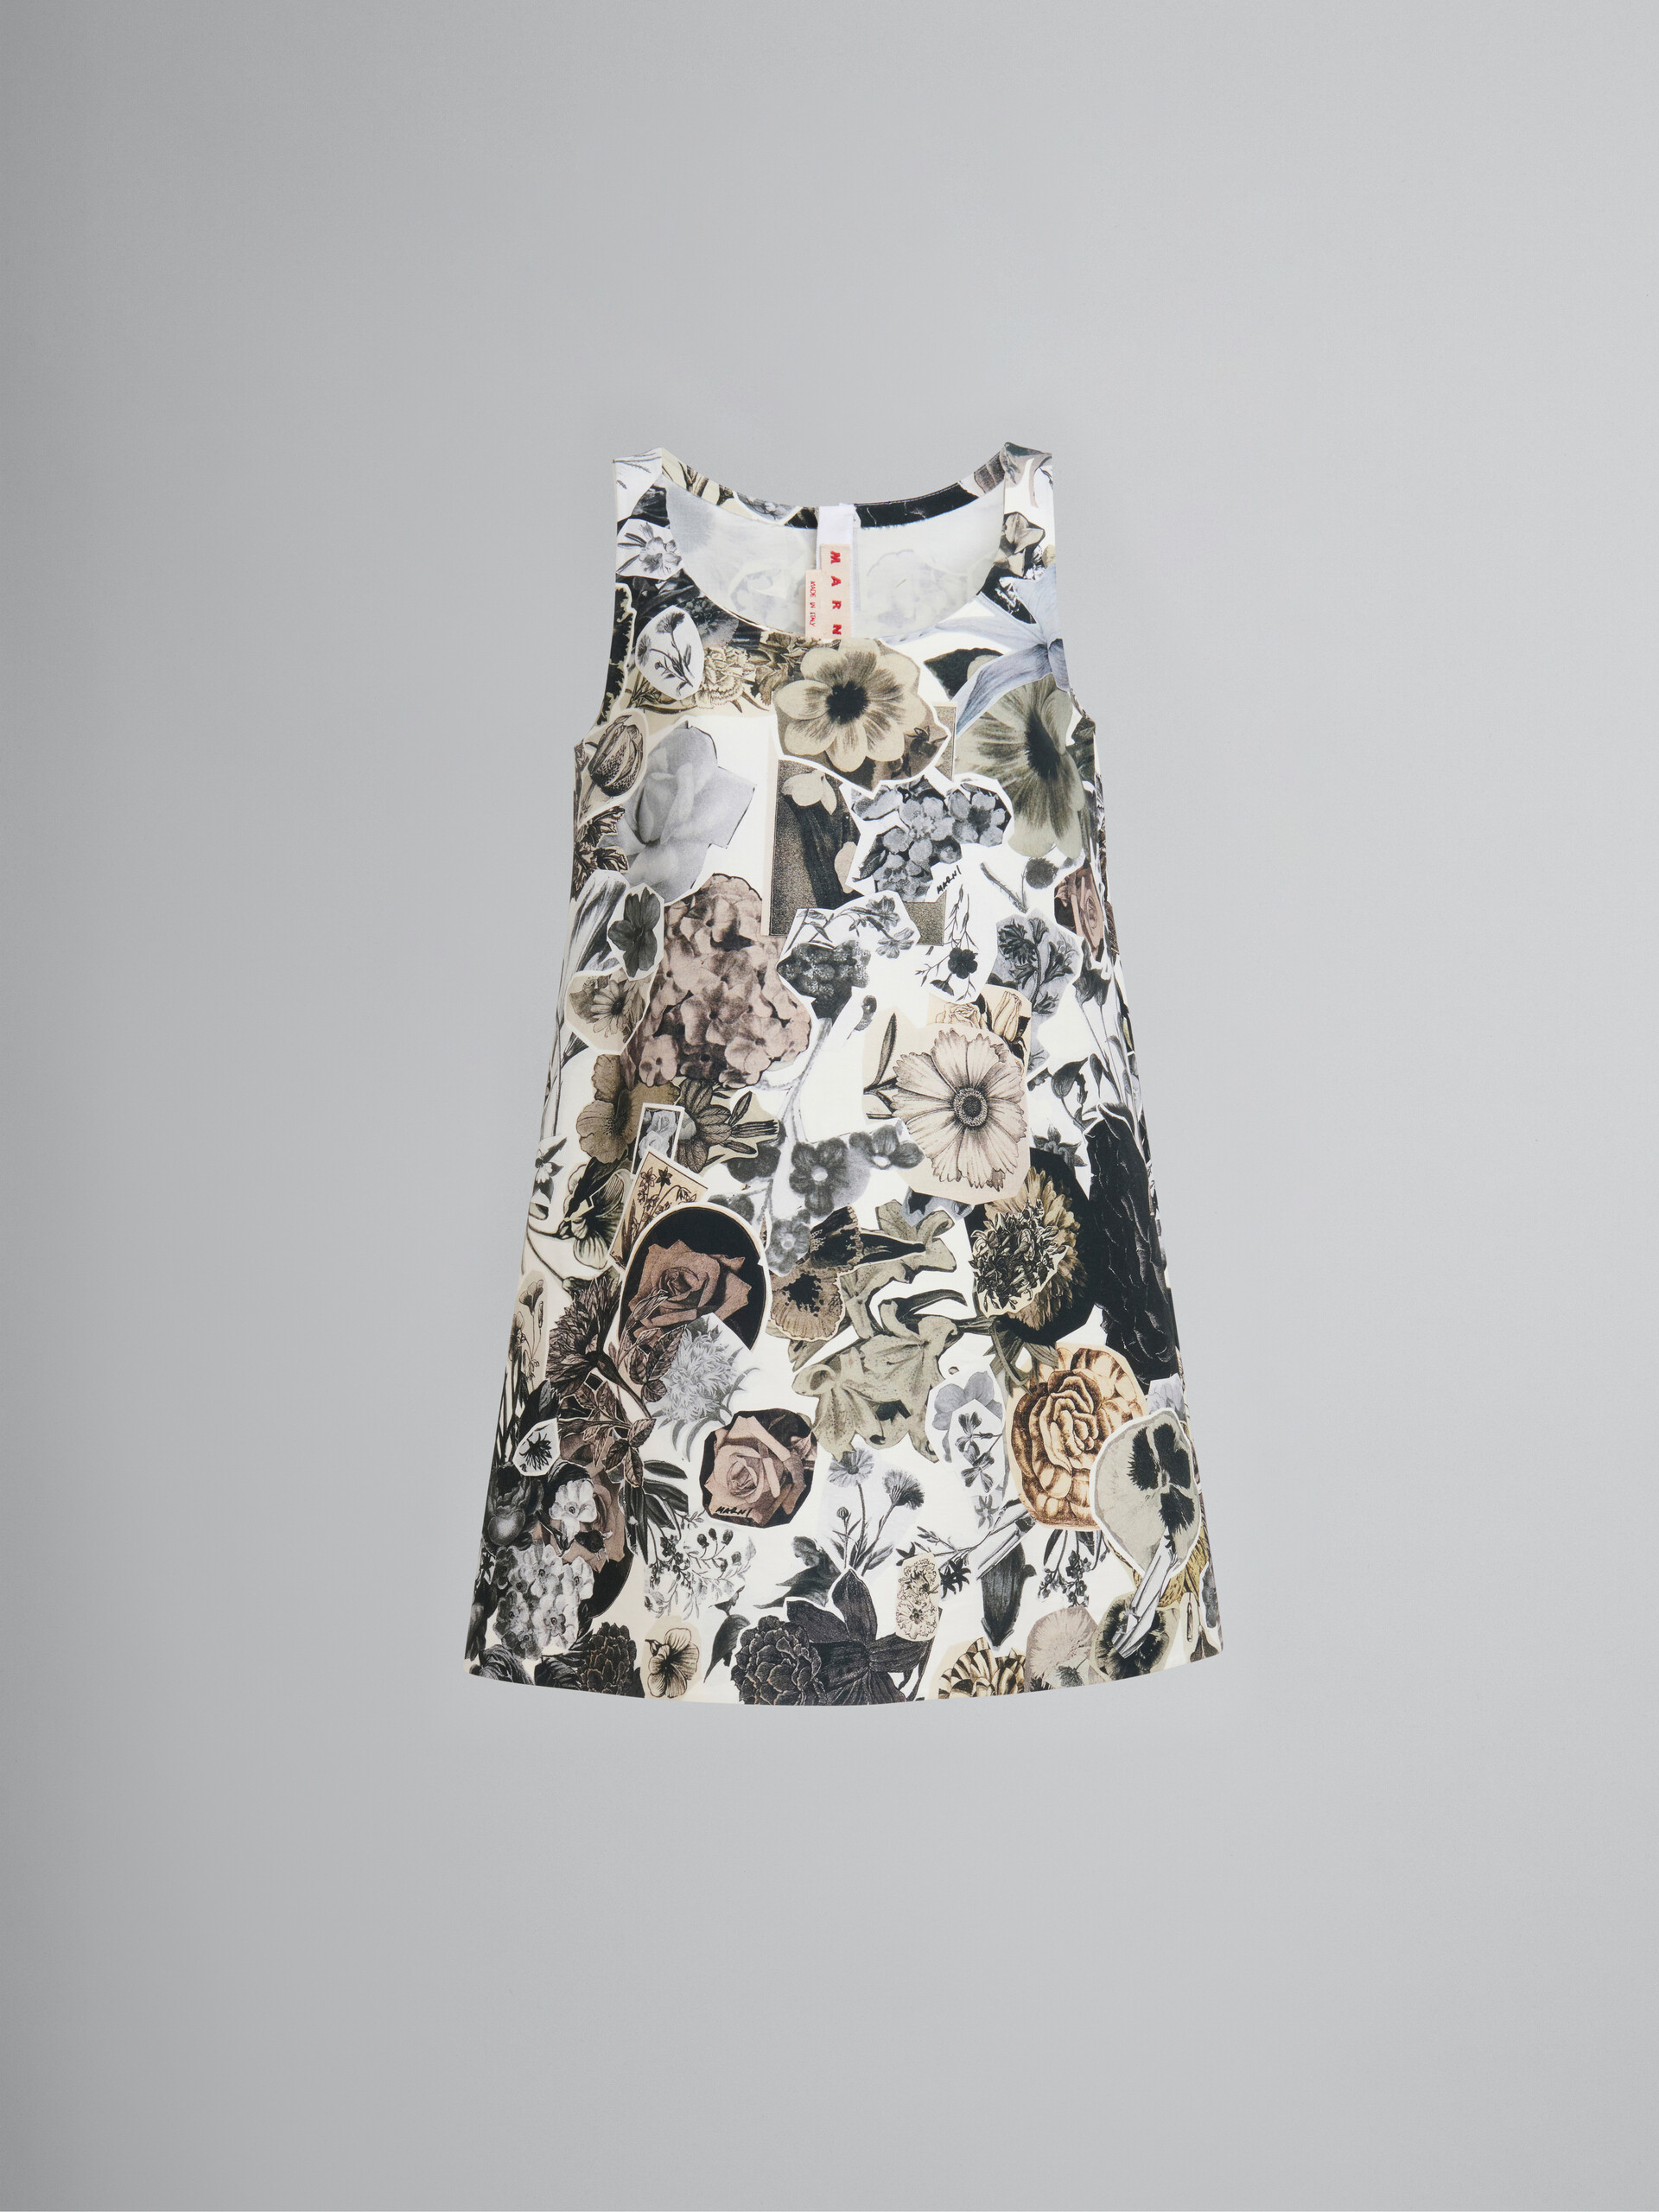 Black and white cady A-line dress with Nocturnal print - Dresses - Image 1